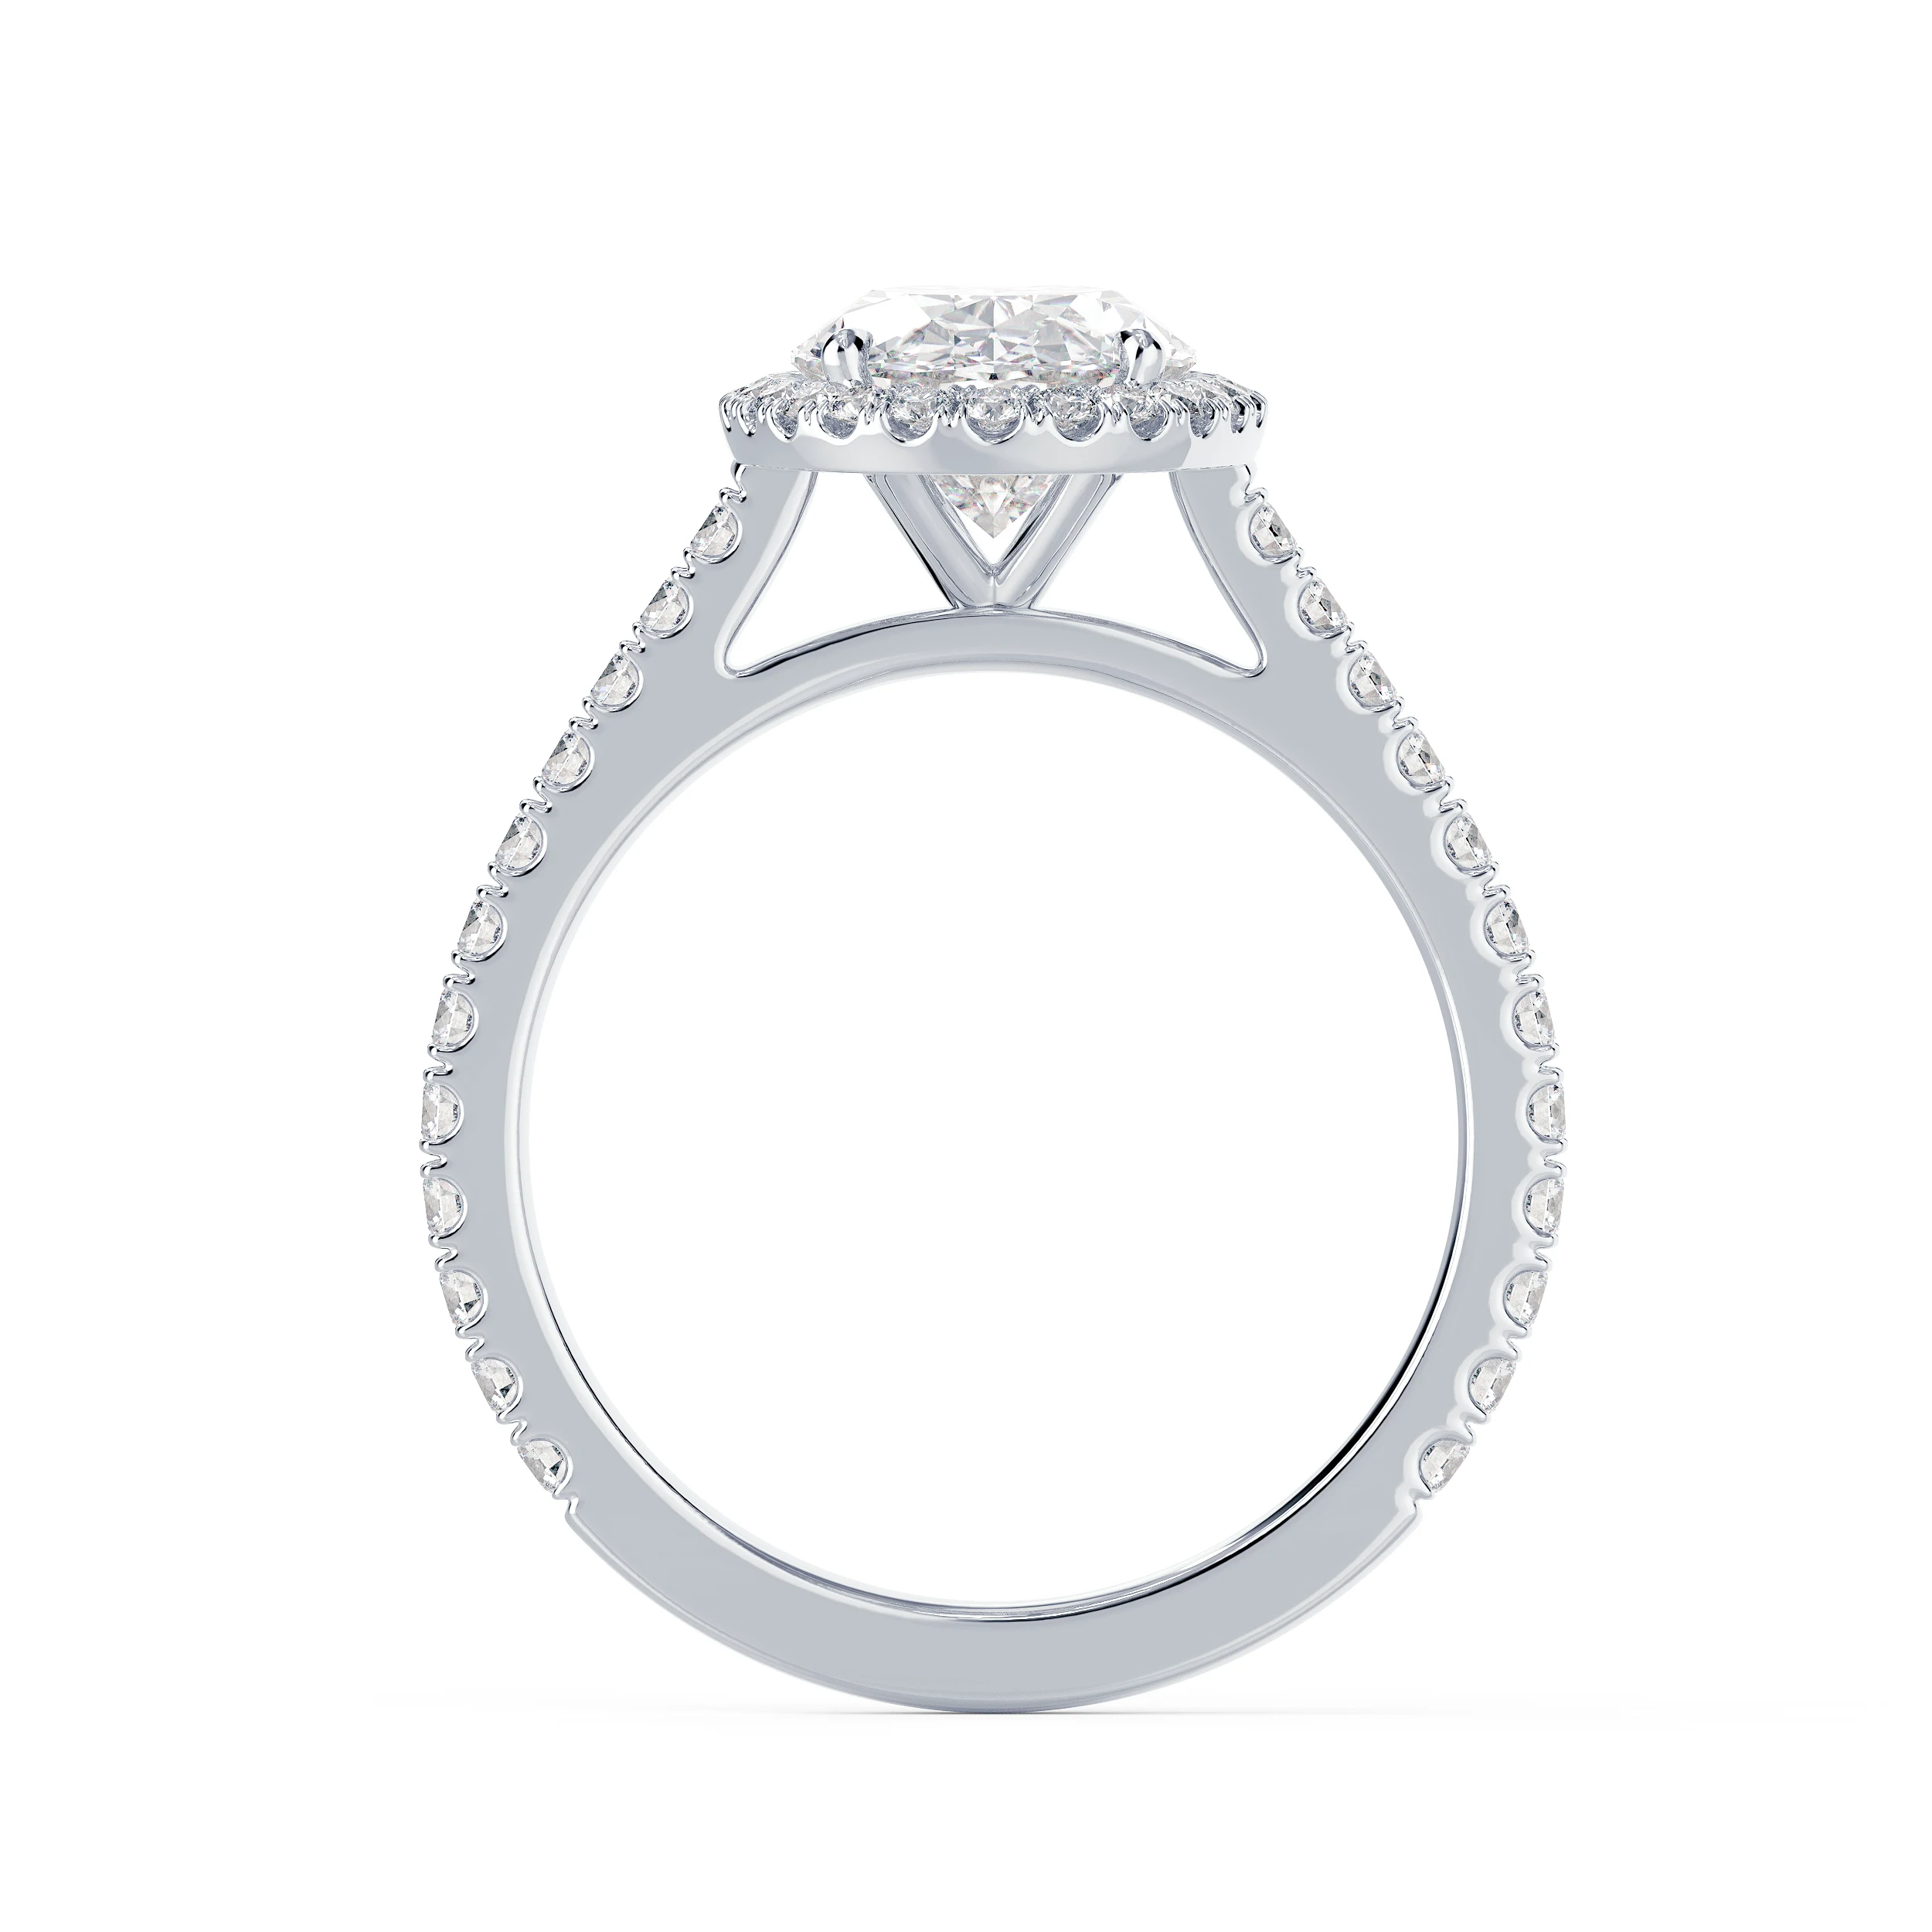 Exceptional Quality Lab Diamonds set in White Gold Oval Halo Pavé Setting (Profile View)